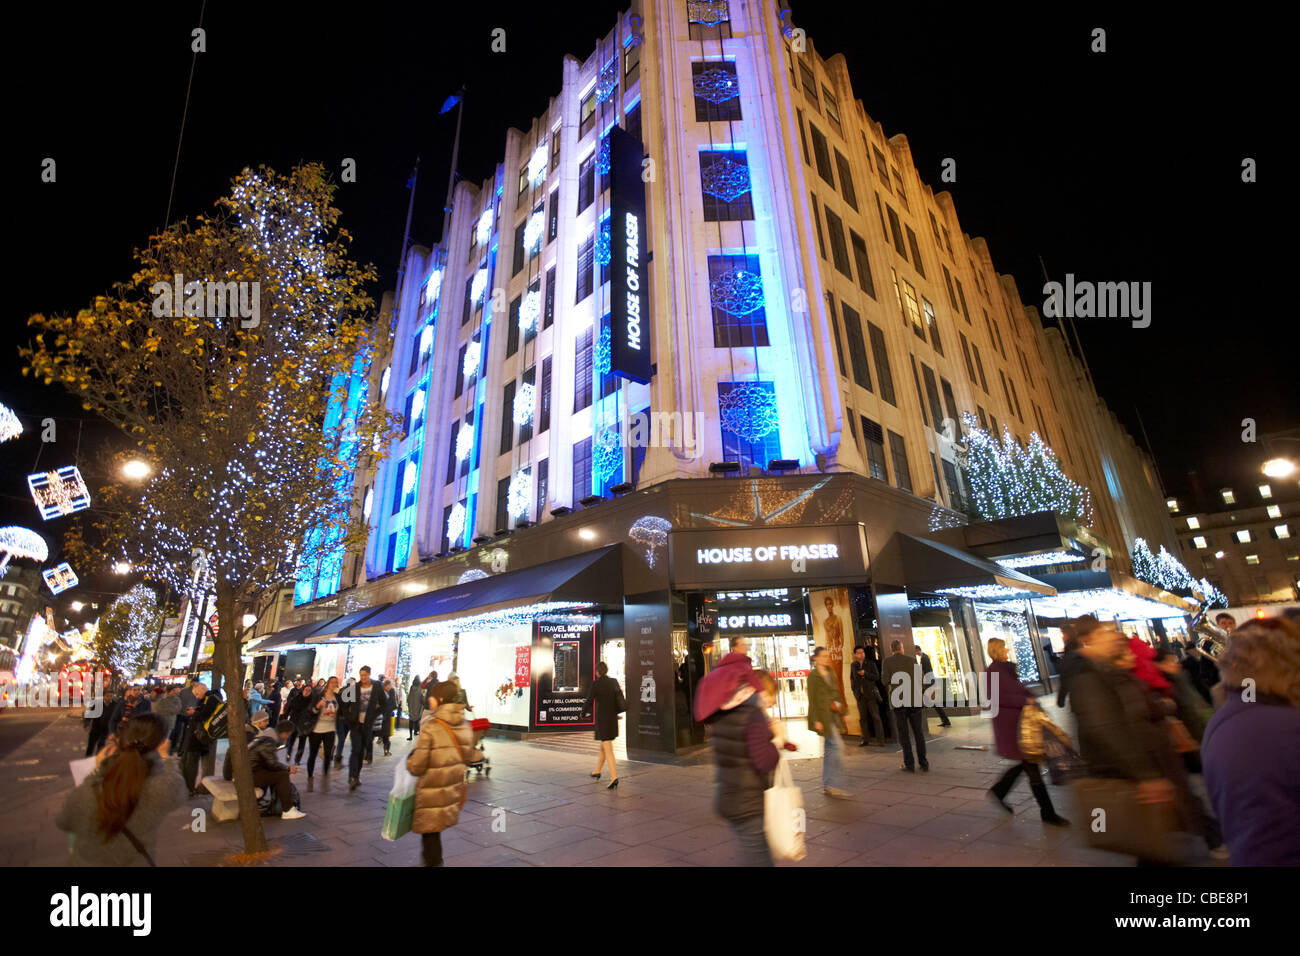 House of Fraser Oxford street Christmas shopping Londres Angleterre Royaume-Uni uk Banque D'Images